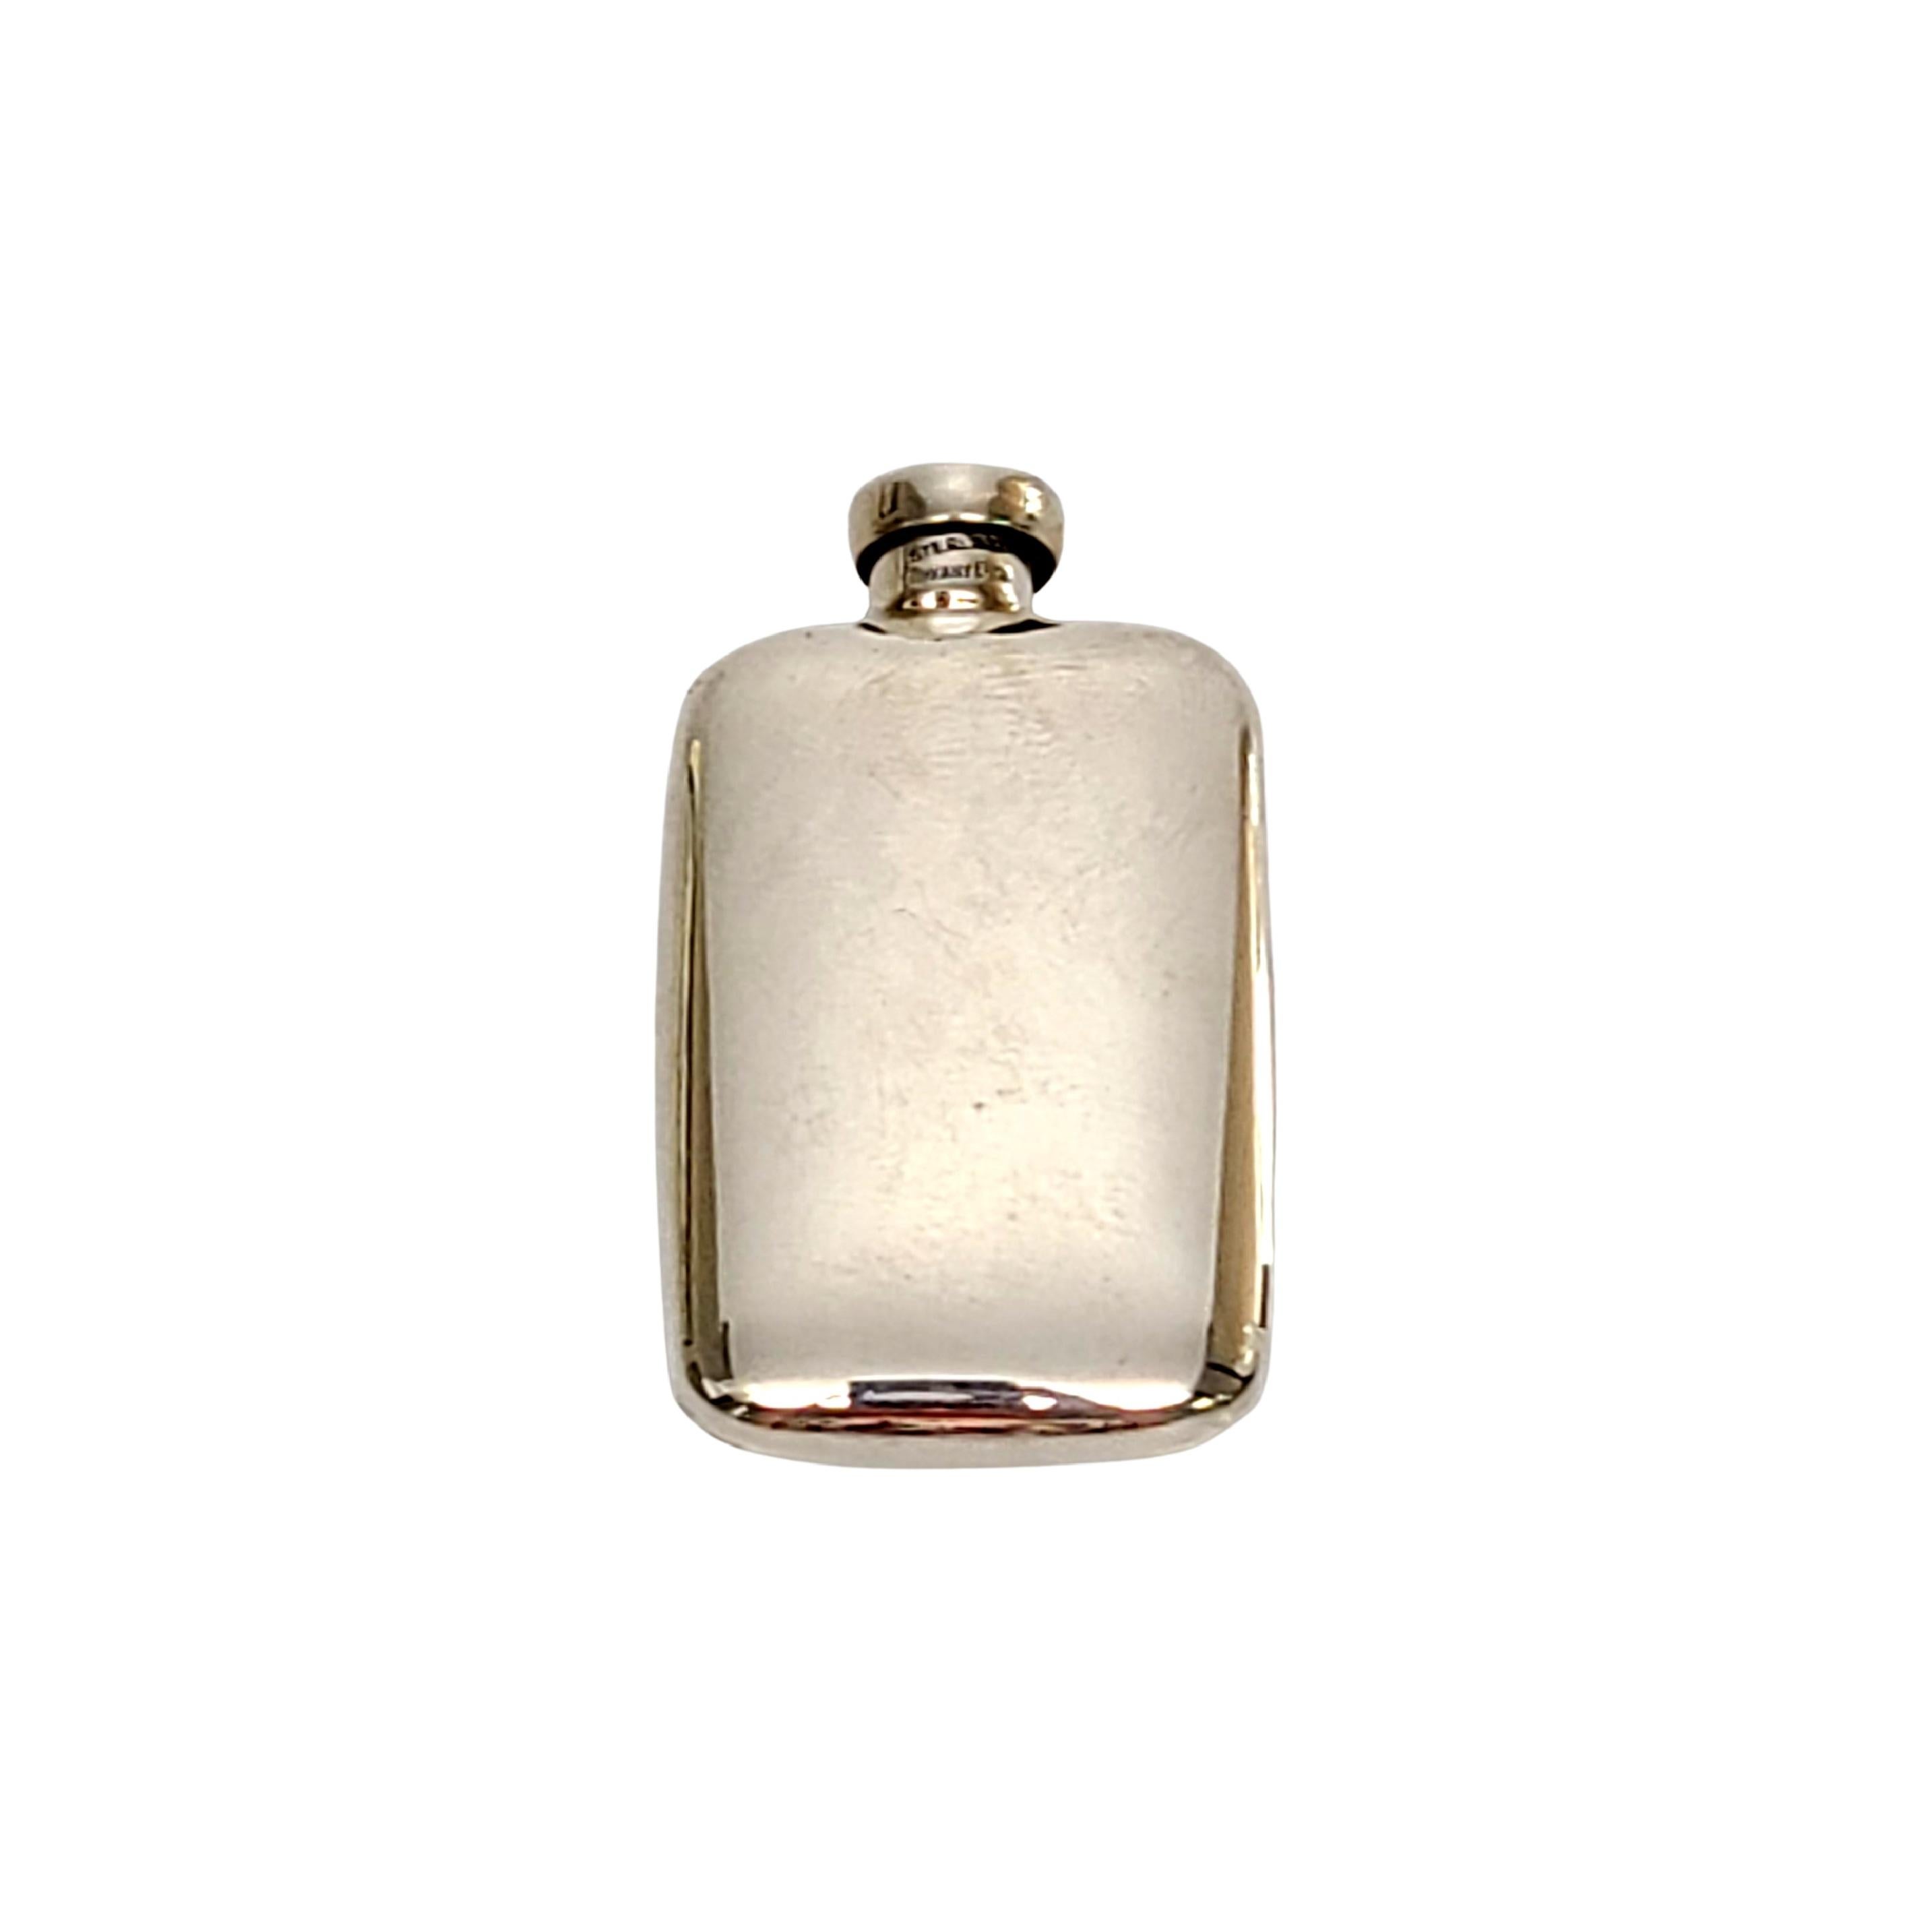 Sterling silver perfume bottle by Tiffany & Co.

This beautiful scent bottle features a smooth polished design on both sides and a screw-off top with dauber attached. Tiffany box and pouch not included.

Measures 1 3/4